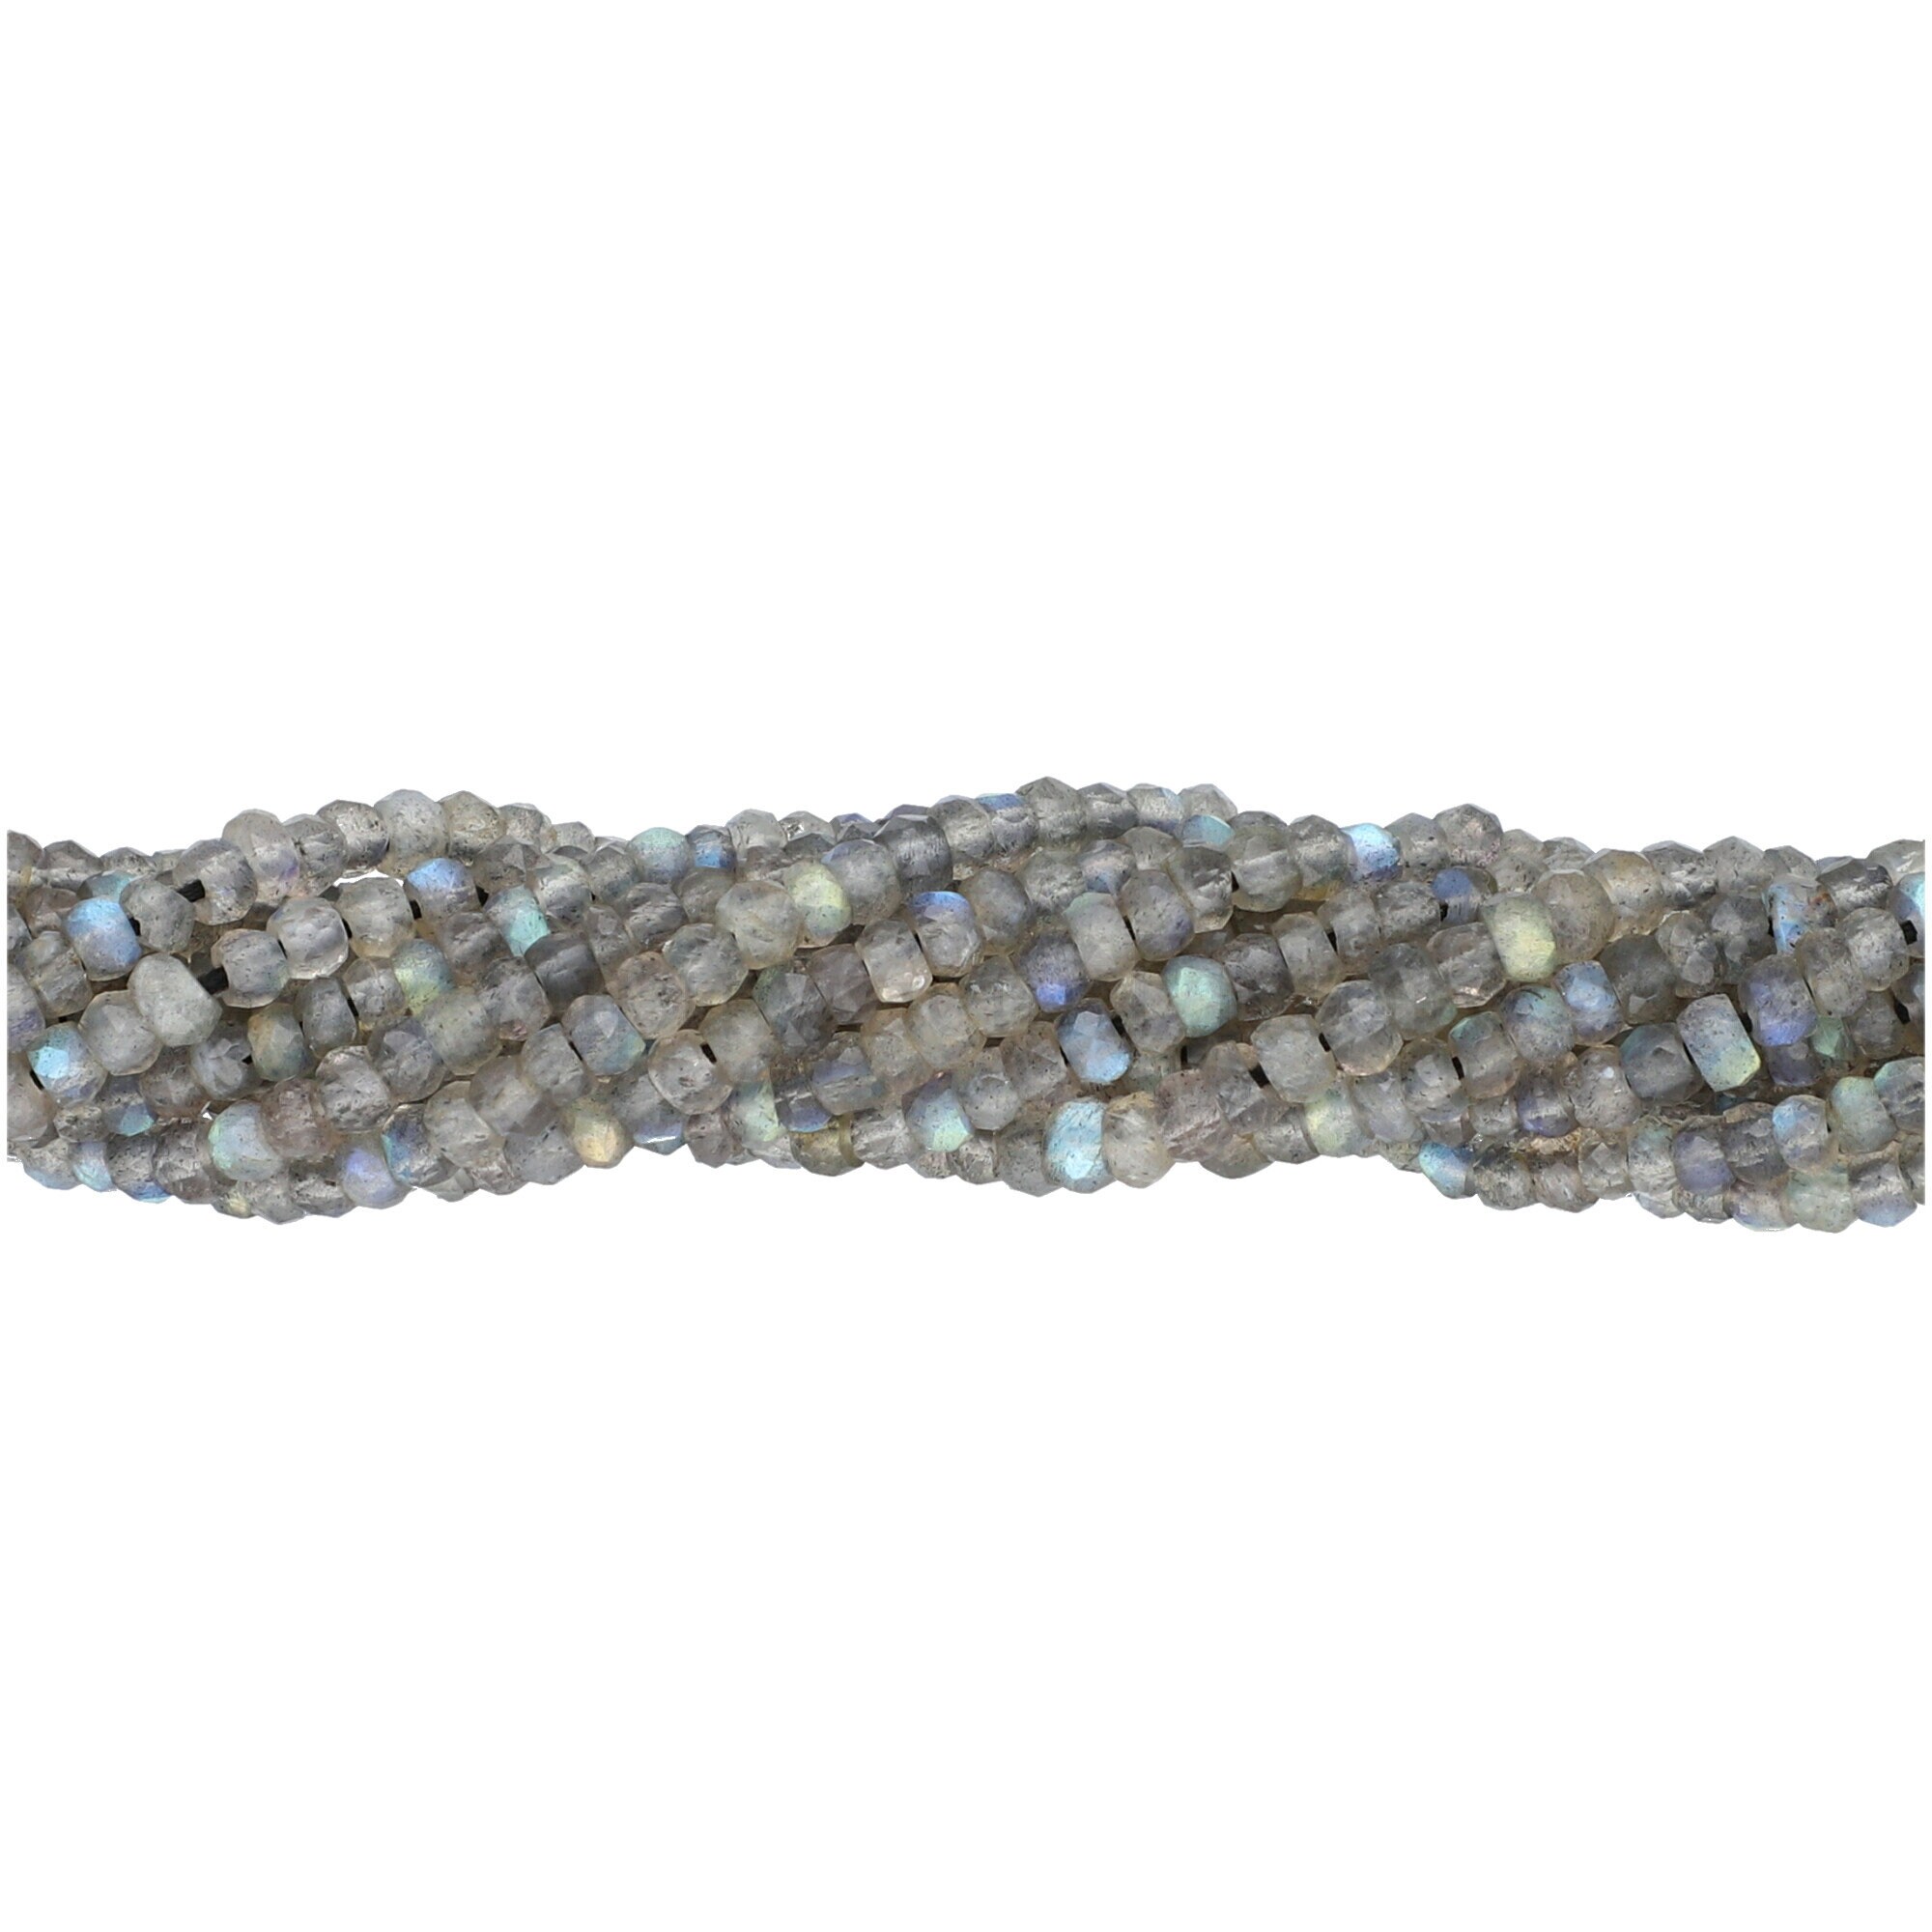 Labradorite Faceted Rondelle Large Hole Size Beads 9mm - 2 mm Drill Hole